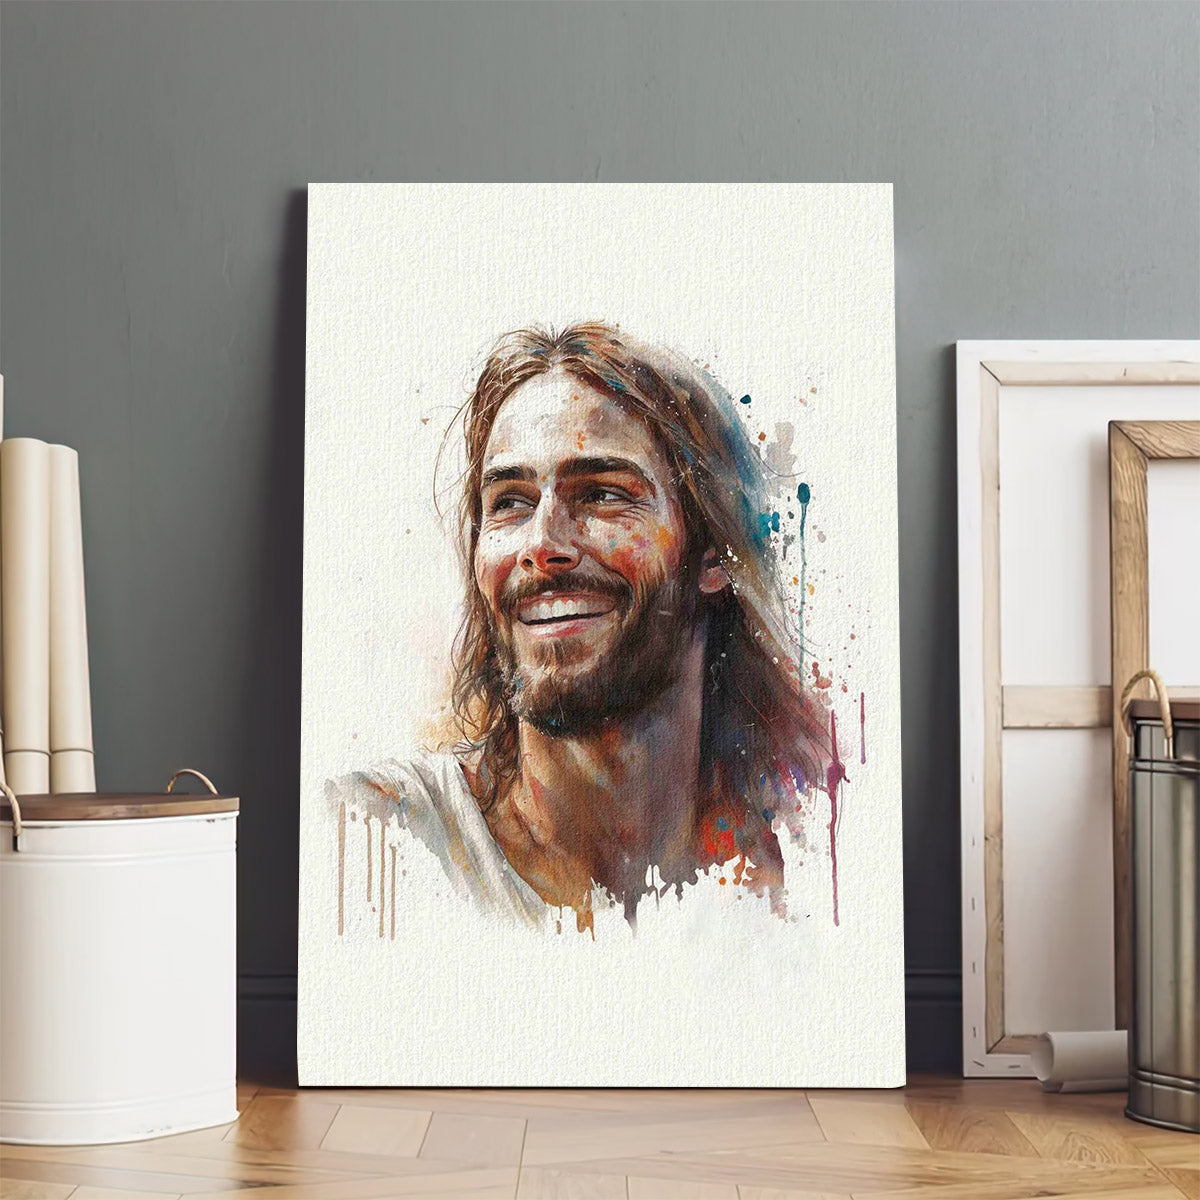 The Divine Painting of Jesus Christ 9 in Watercolor - Jesus Canvas Art - Christian Wall Canvas